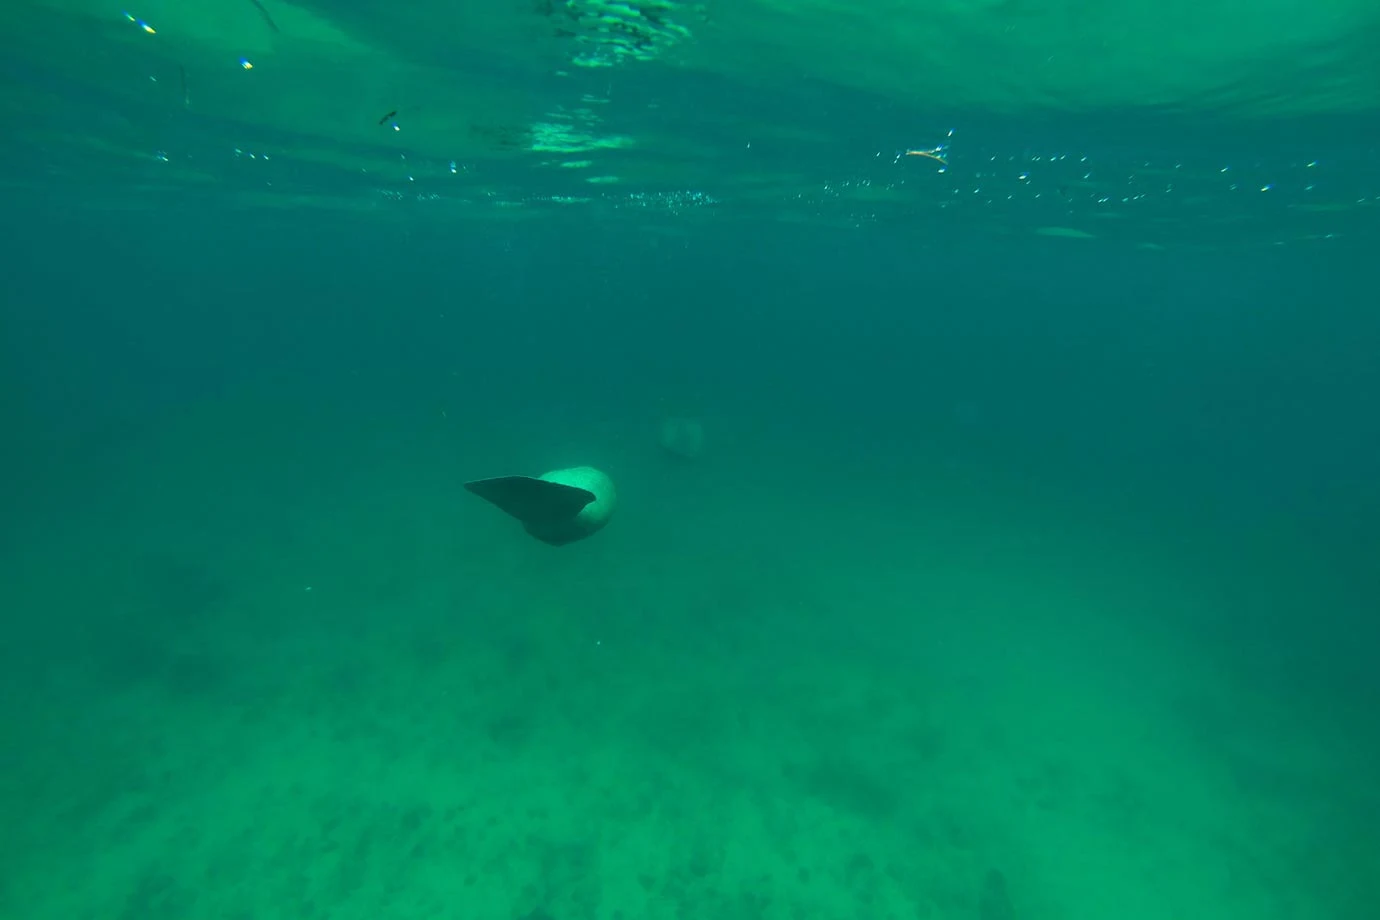 After sailing for about an hour, the first thing we came across while snorkelling were manatees